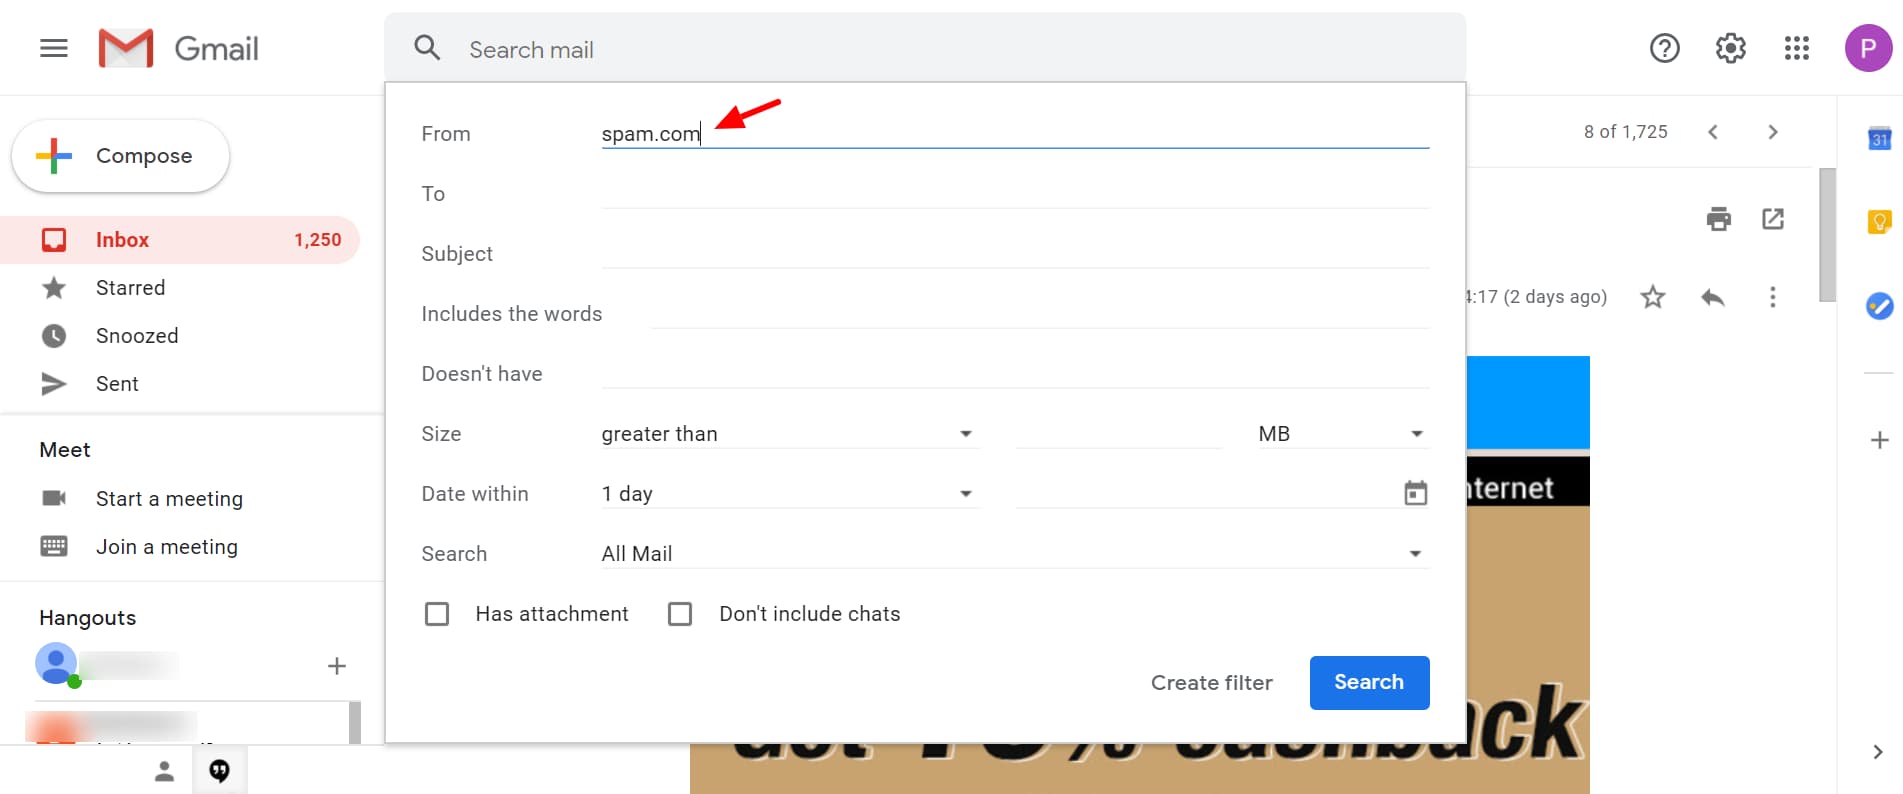 how to block email on gmail: type the domain name